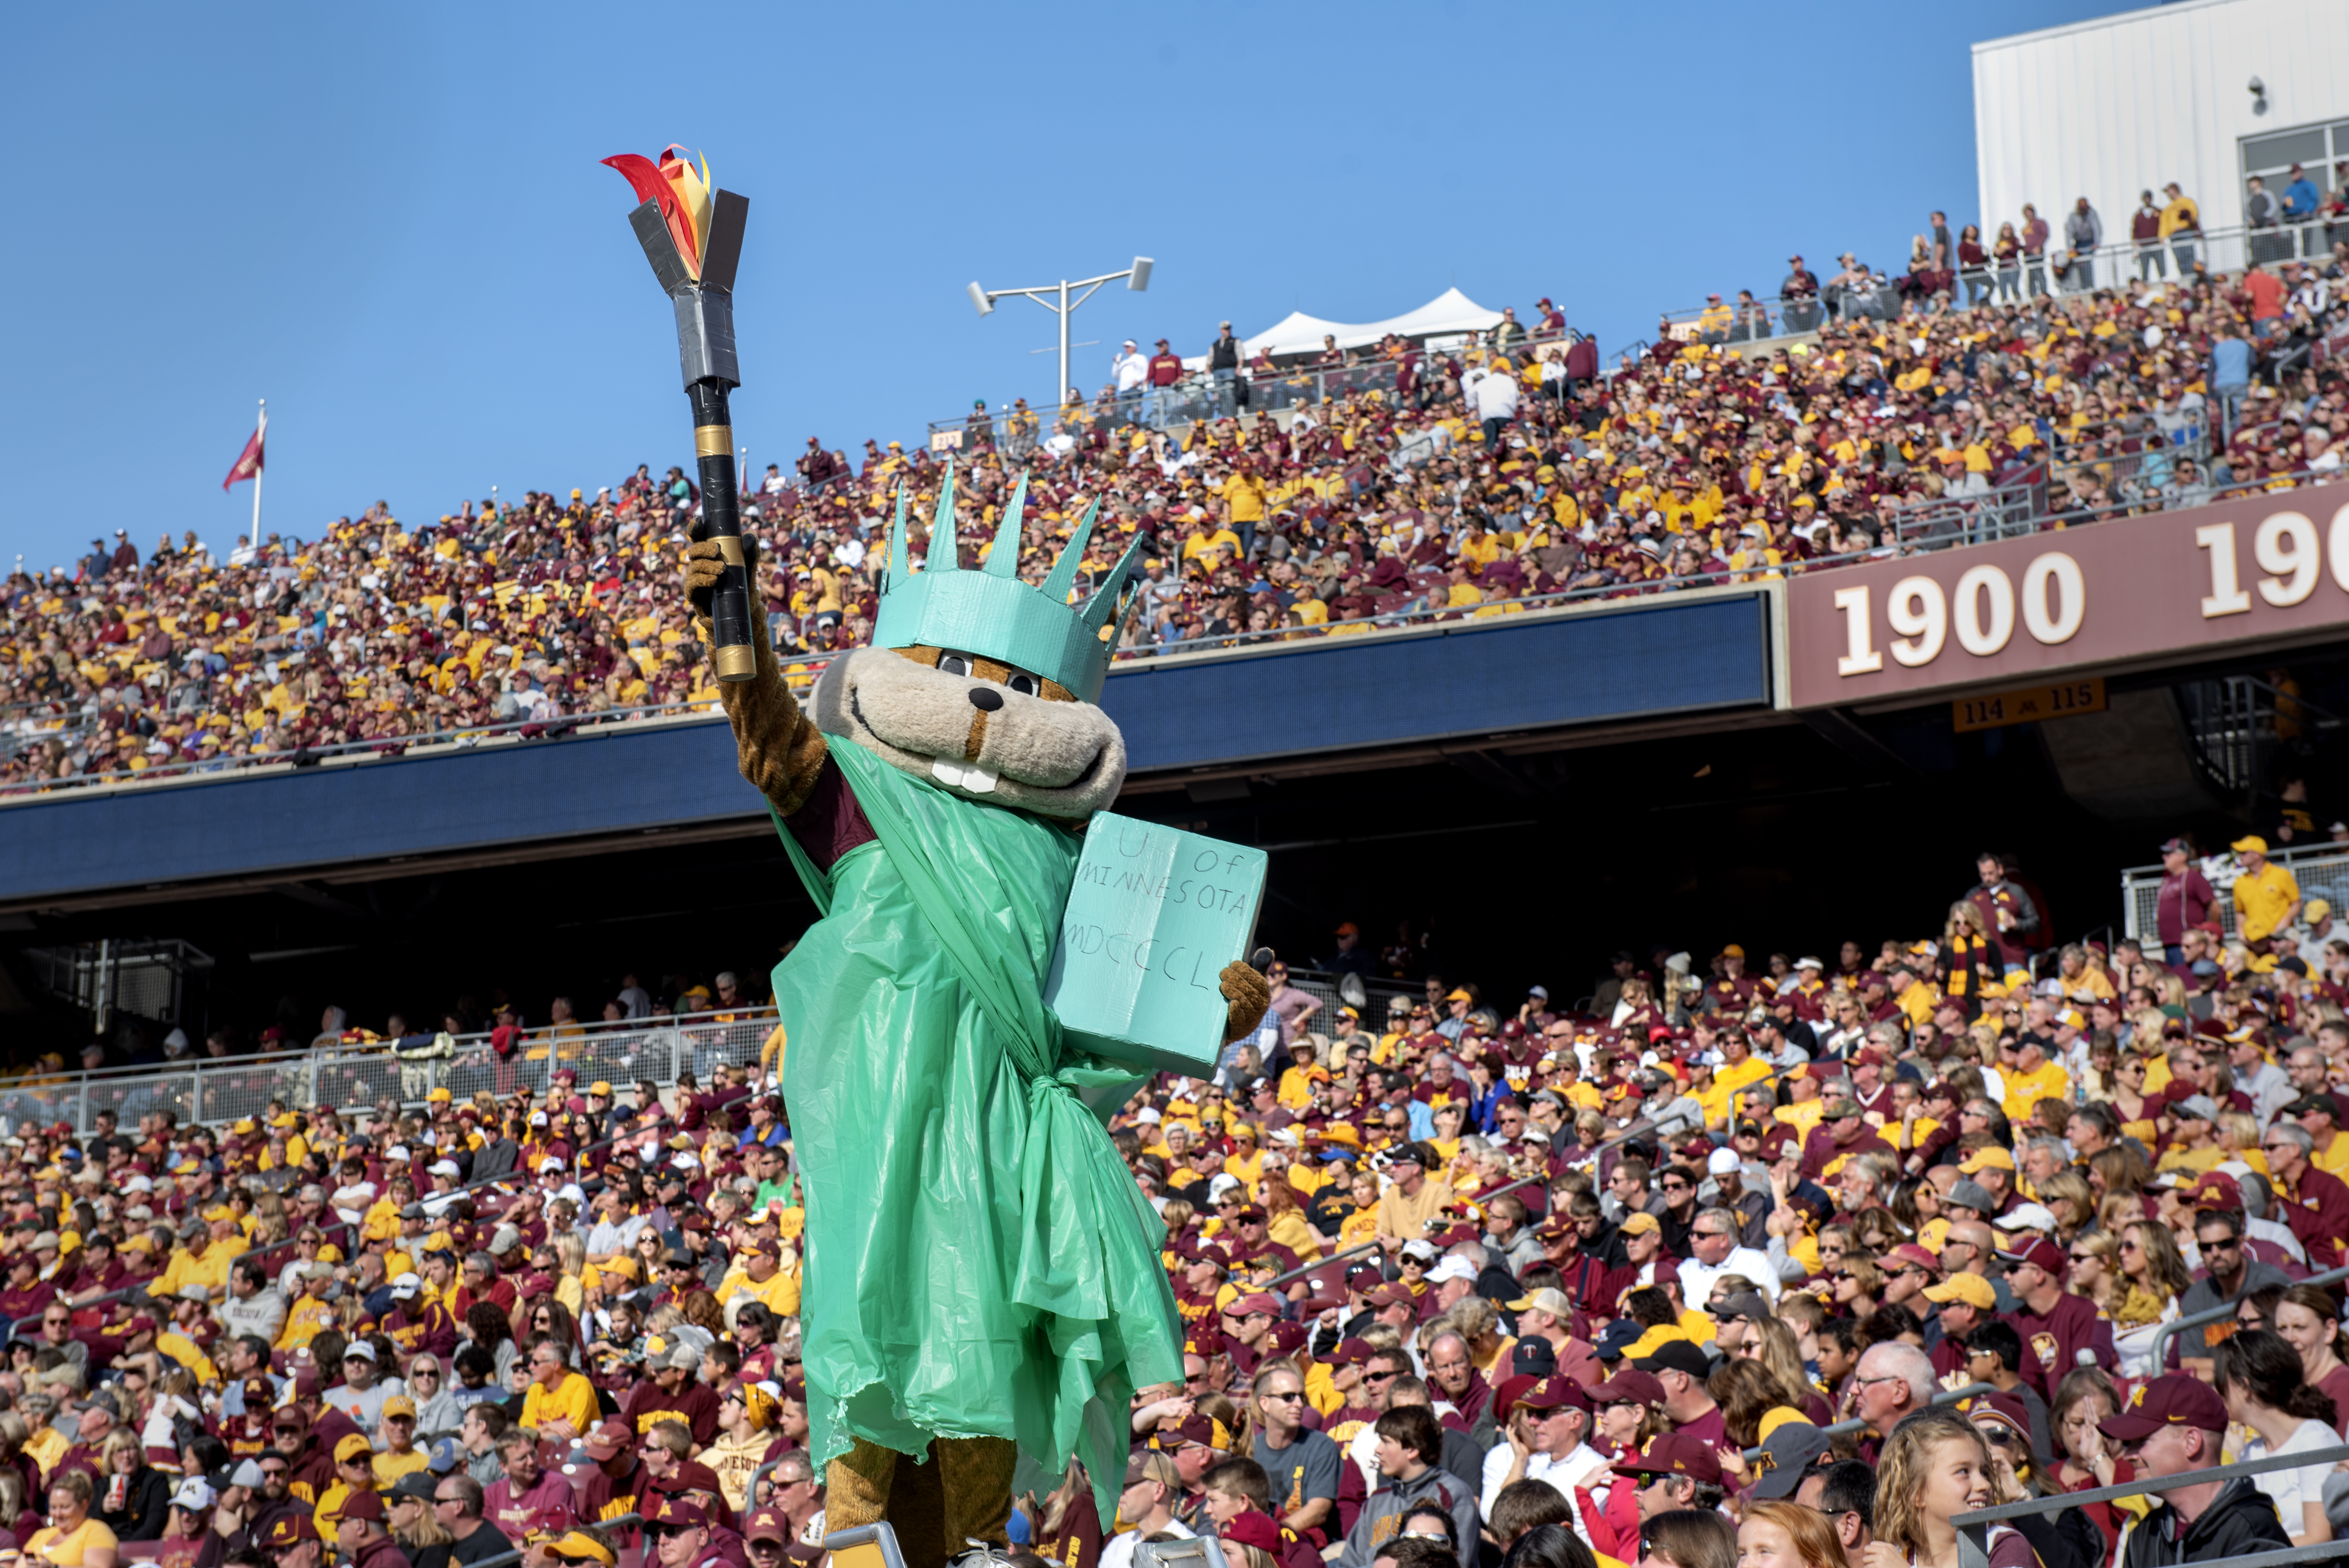 Goldy gopher mascot dressed in liberty costume at football game